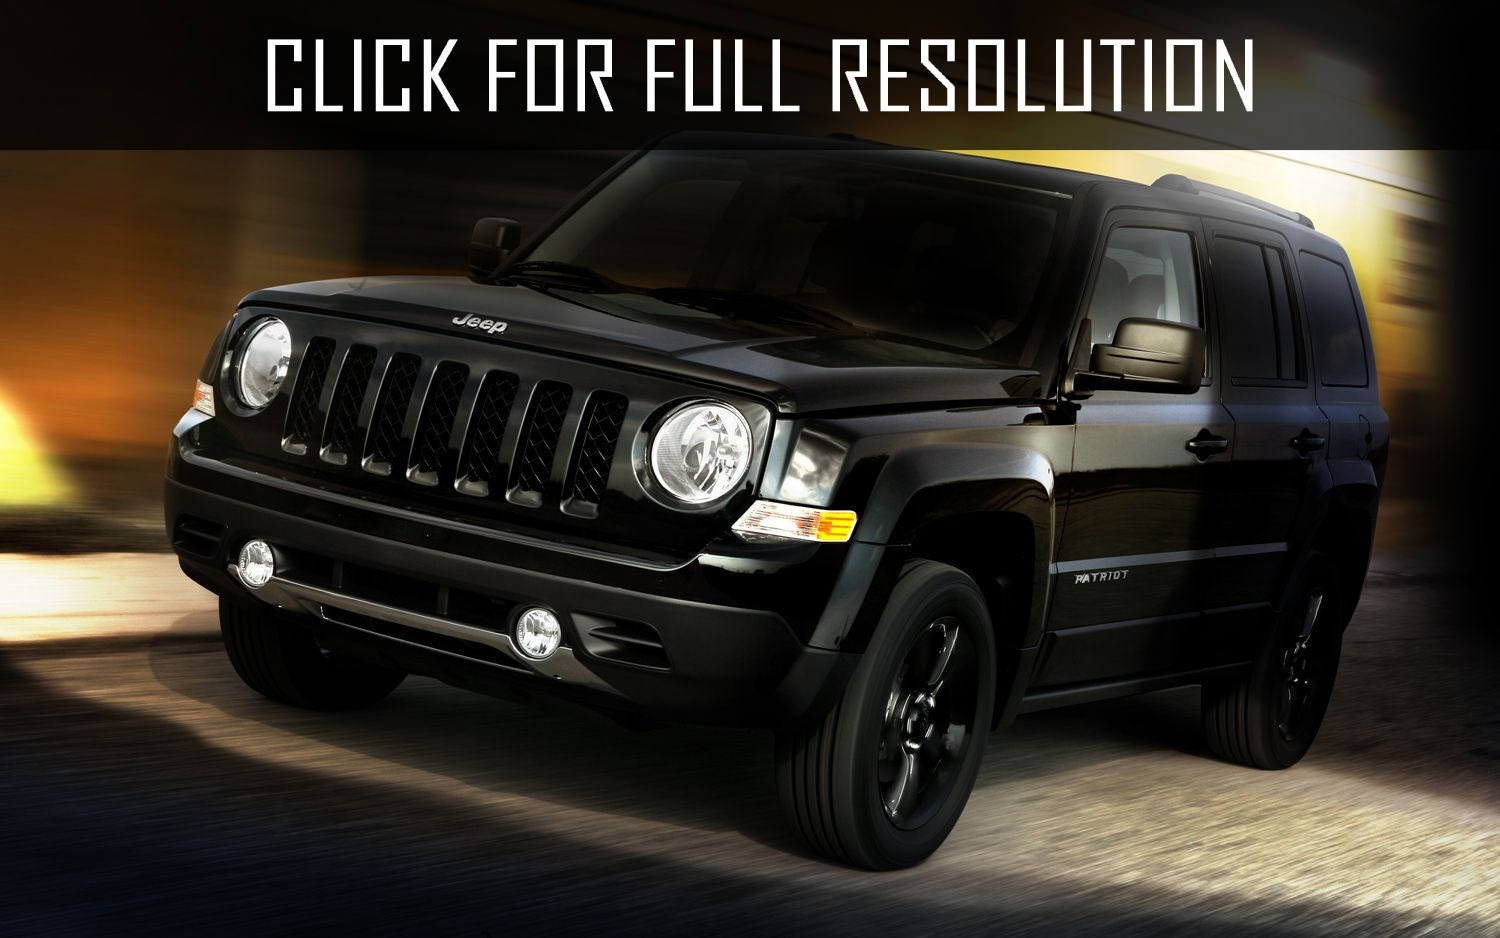 2016 Jeep Patriot Limited